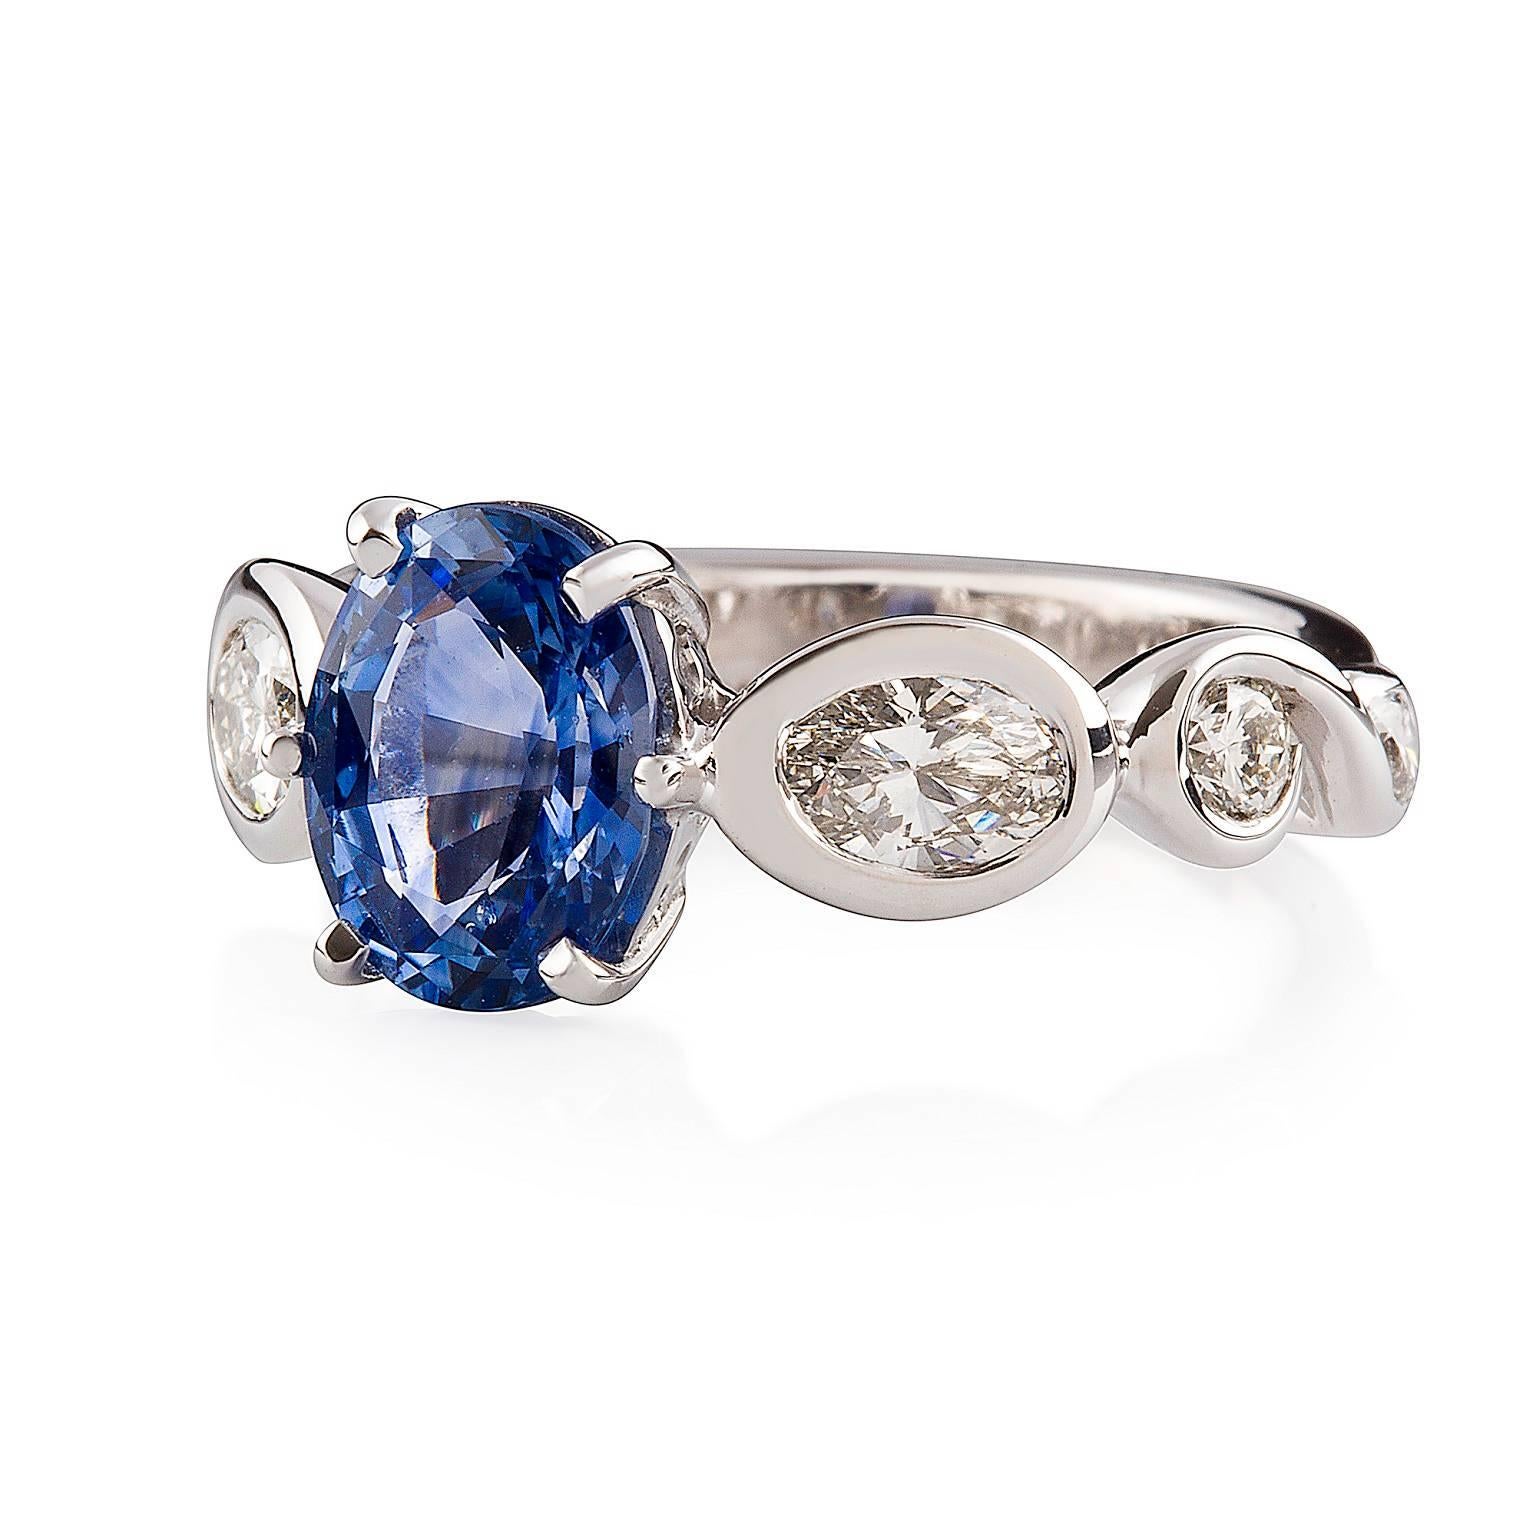 Ceylon Zaffiro Ring

Affording eternal style, this elegant ring is set with a stunning Ceylon sapphire with a pair of individually set diamonds on either side.

Oval faceted sapphire: Medium light strong blue. Eye Clean, Ceylon origin, 8.85 x 6.92 x